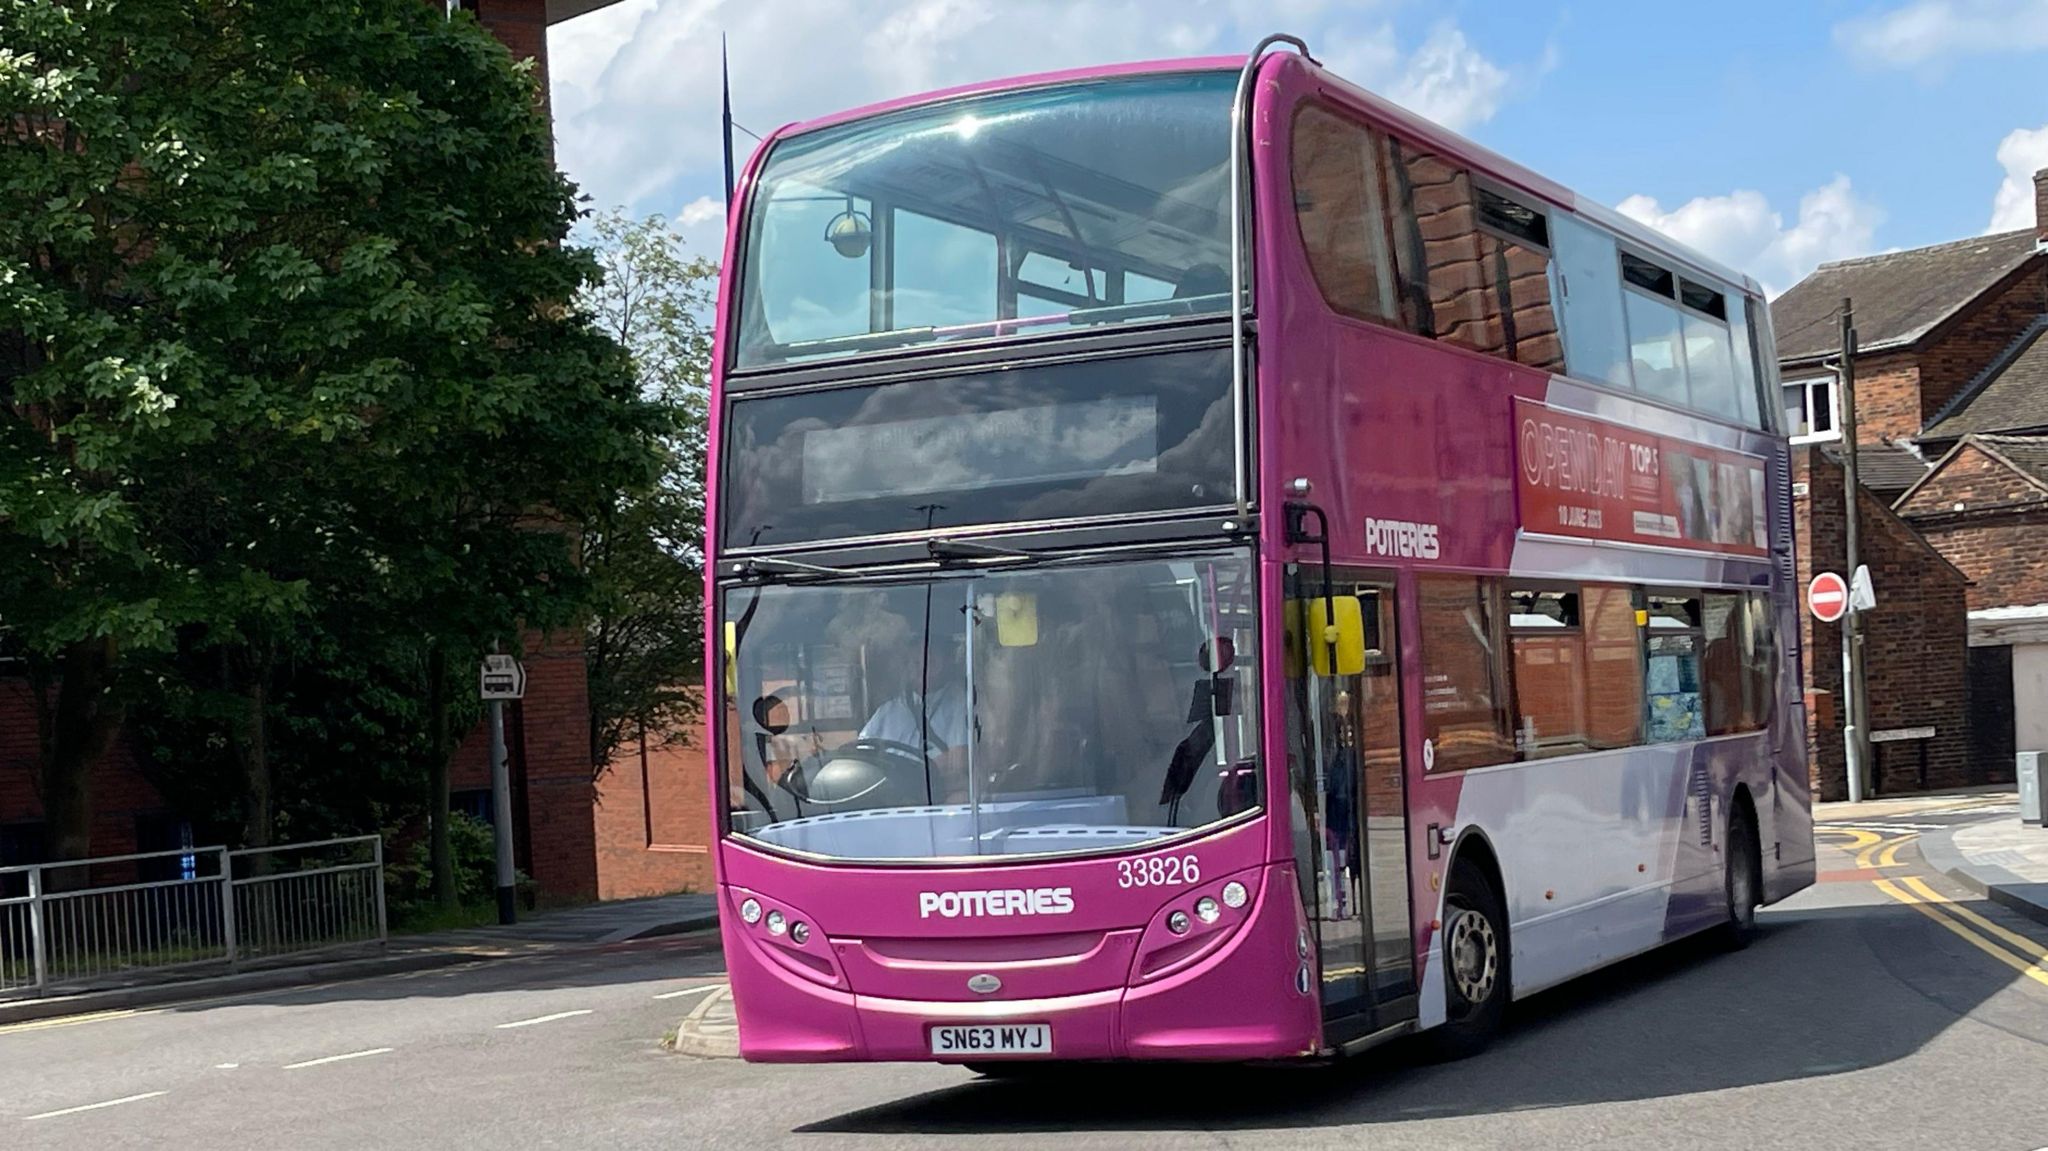 A bus in Stoke-on-Trent